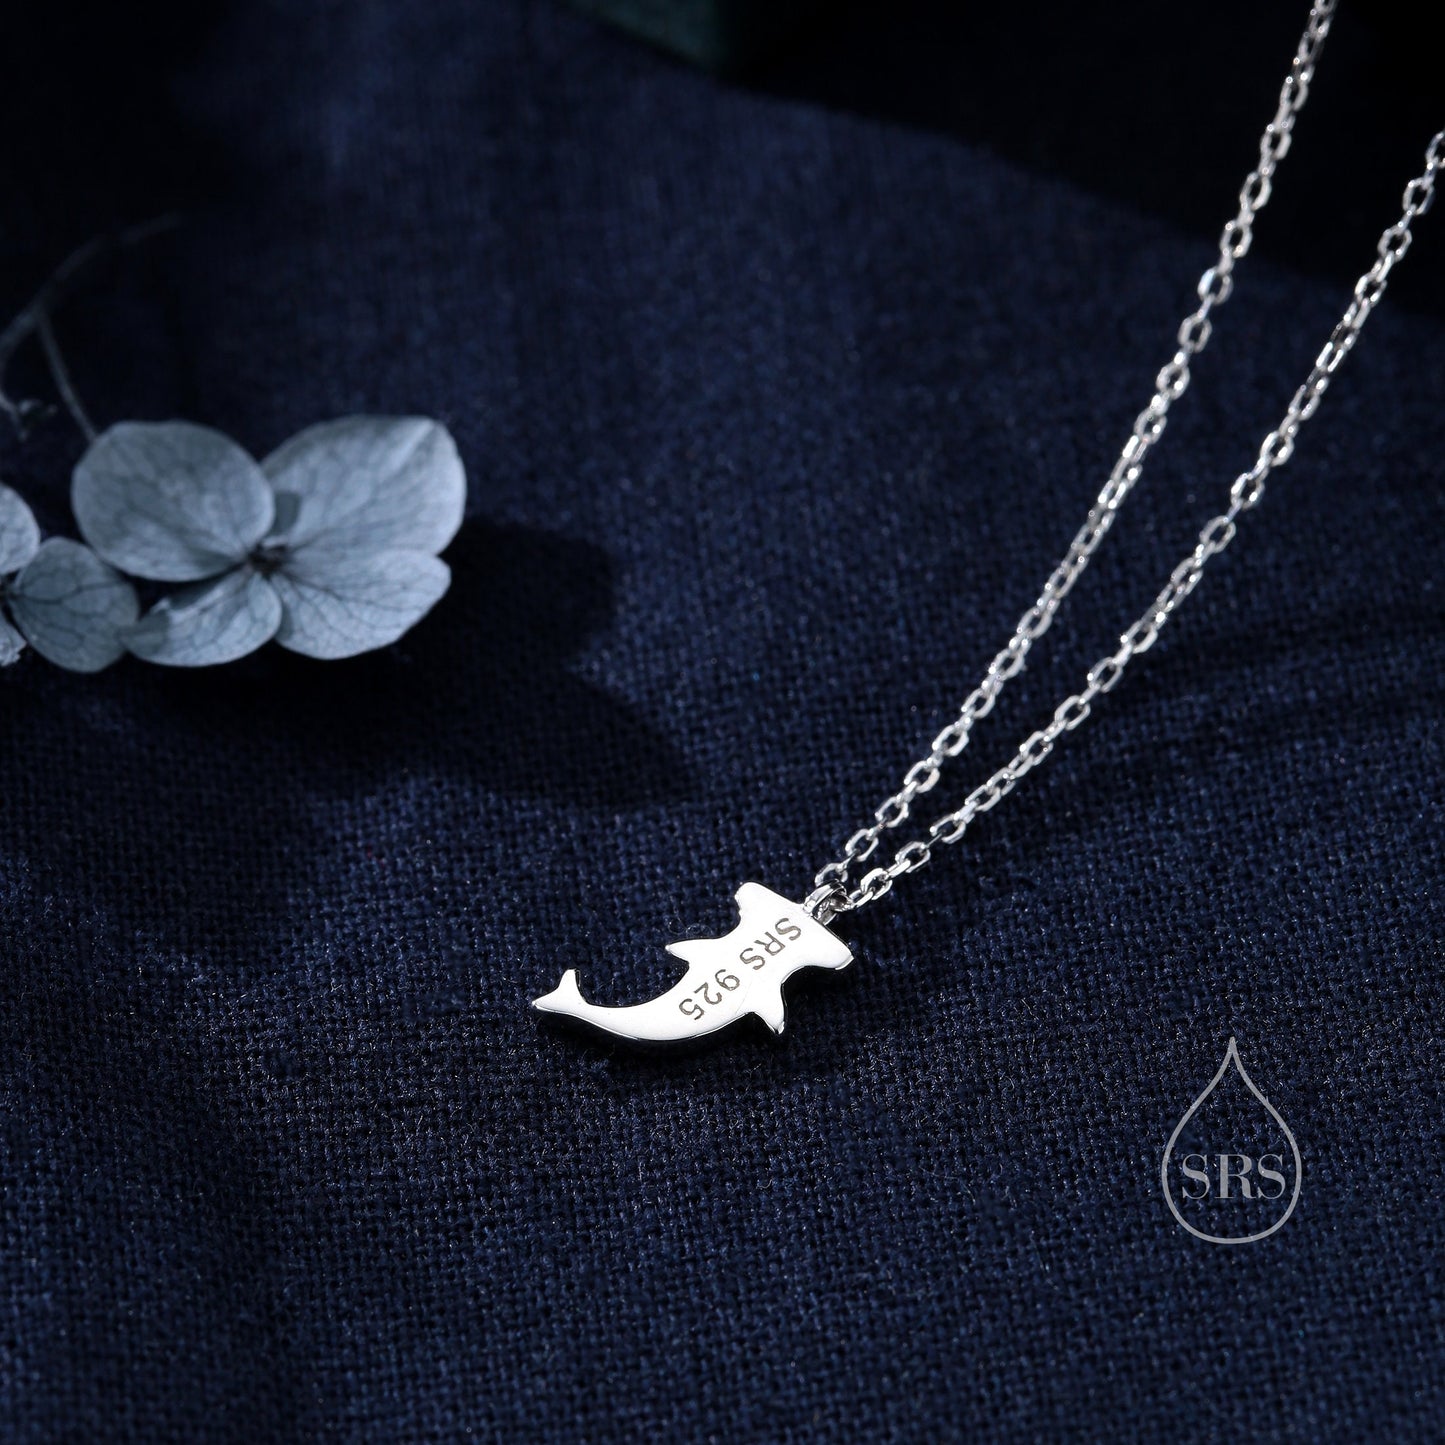 Tiny Smiling Hammerhead Shark Pendant Necklace in Sterling Silver, Silver or gold, Shark Necklace, Shark Fish Necklace, Cute Fish Necklace